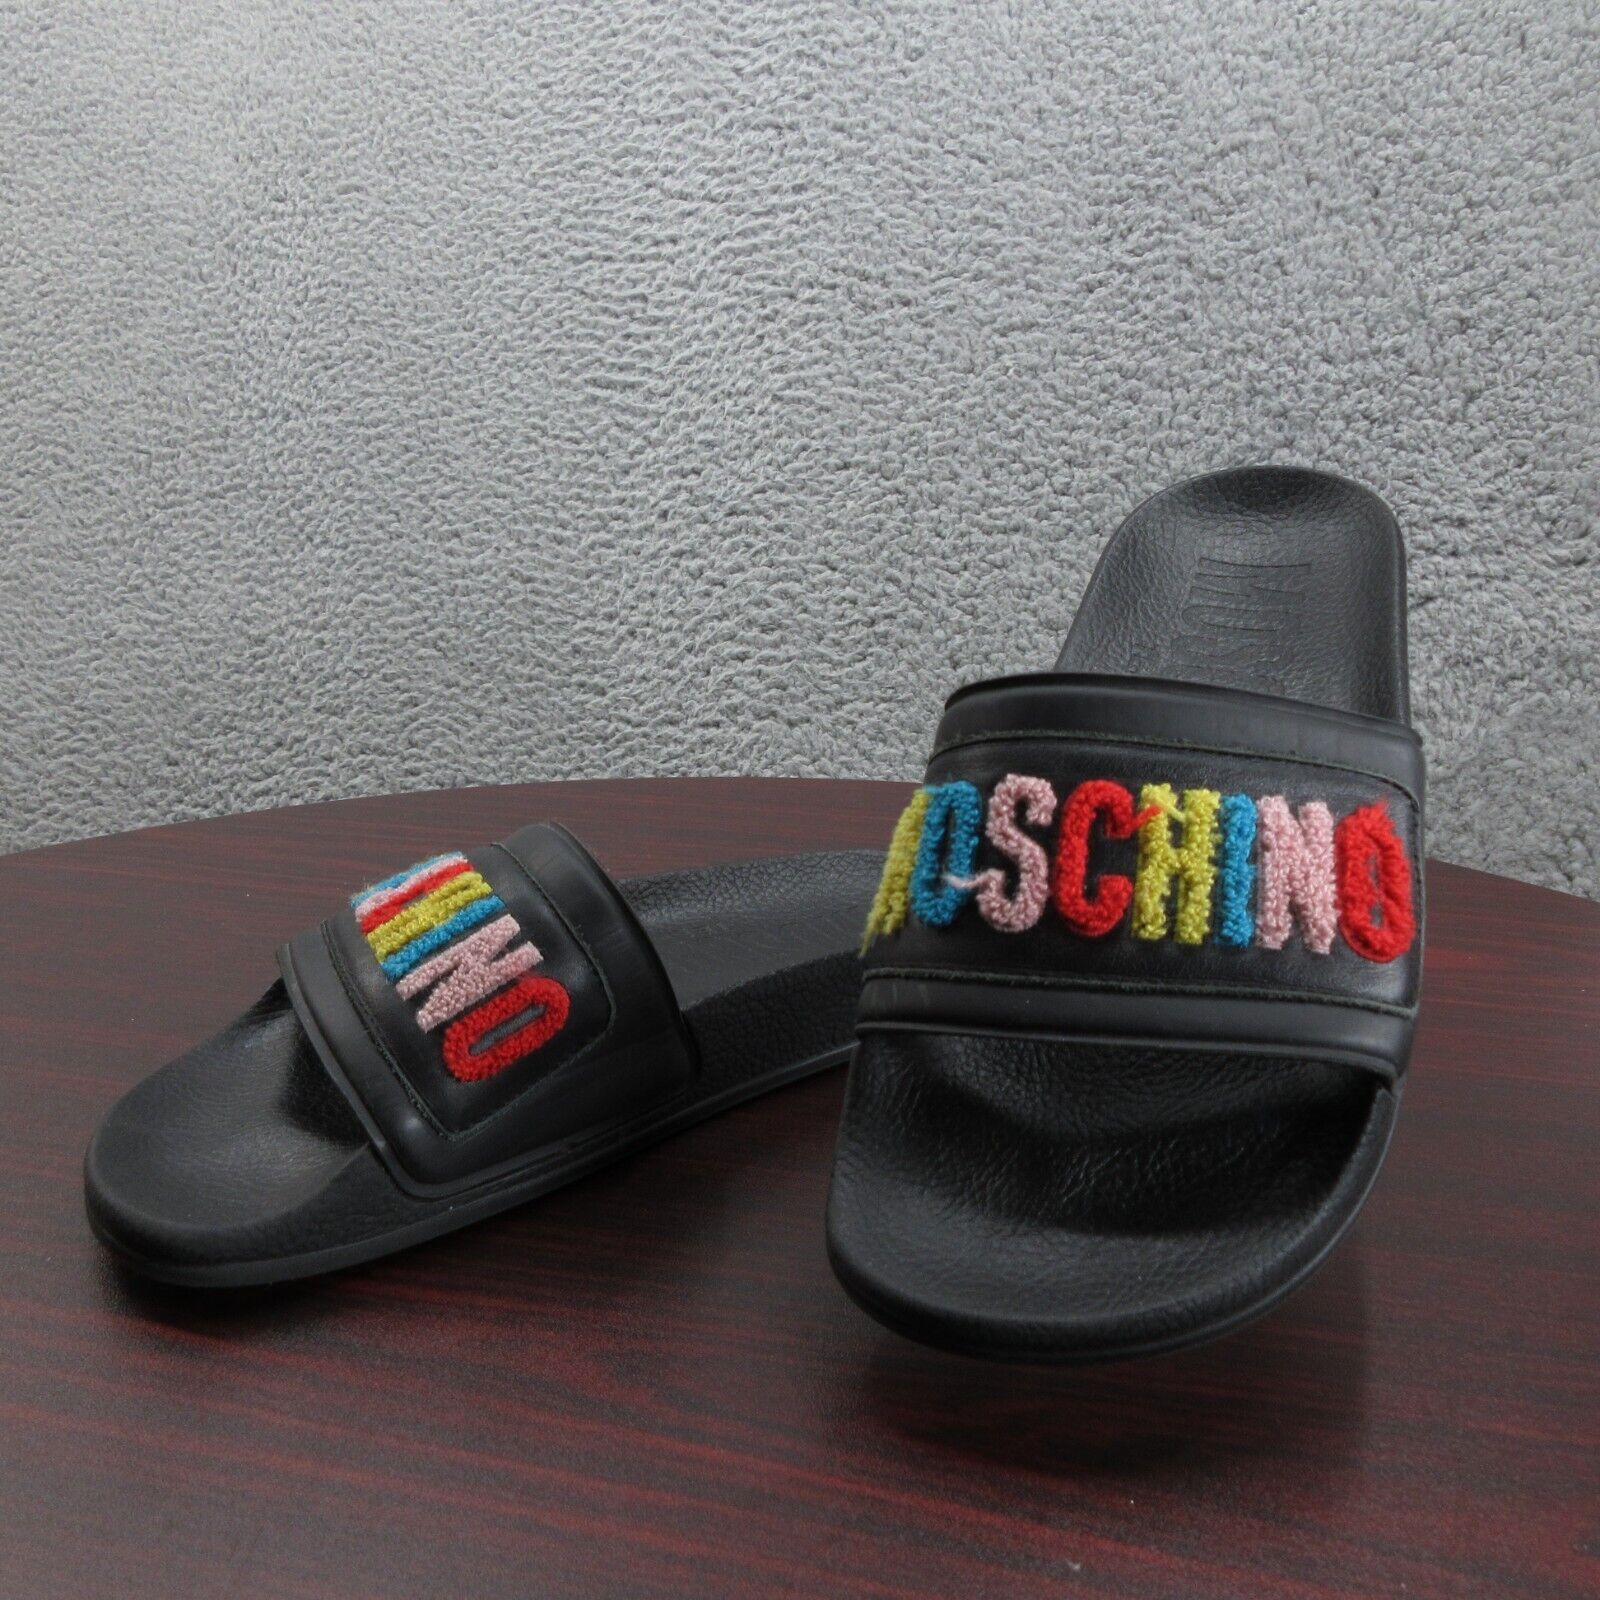 Moschino Teen Slides Sandals 36 Black Colorful Letters Made In Italy